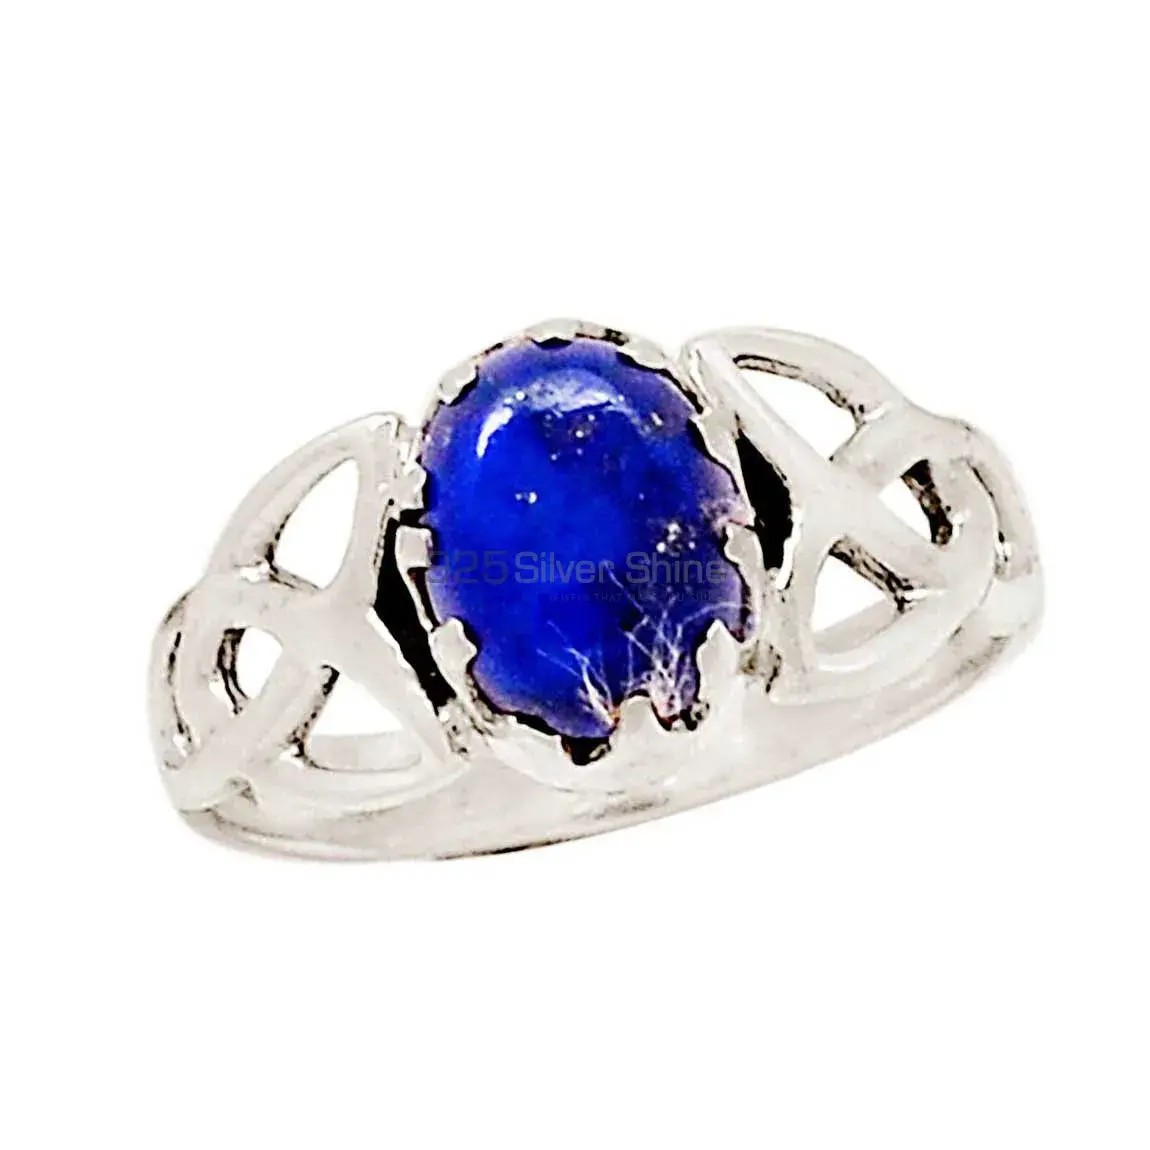 Lapis Cabochon Stone Rings In Silver 925SR2324_0